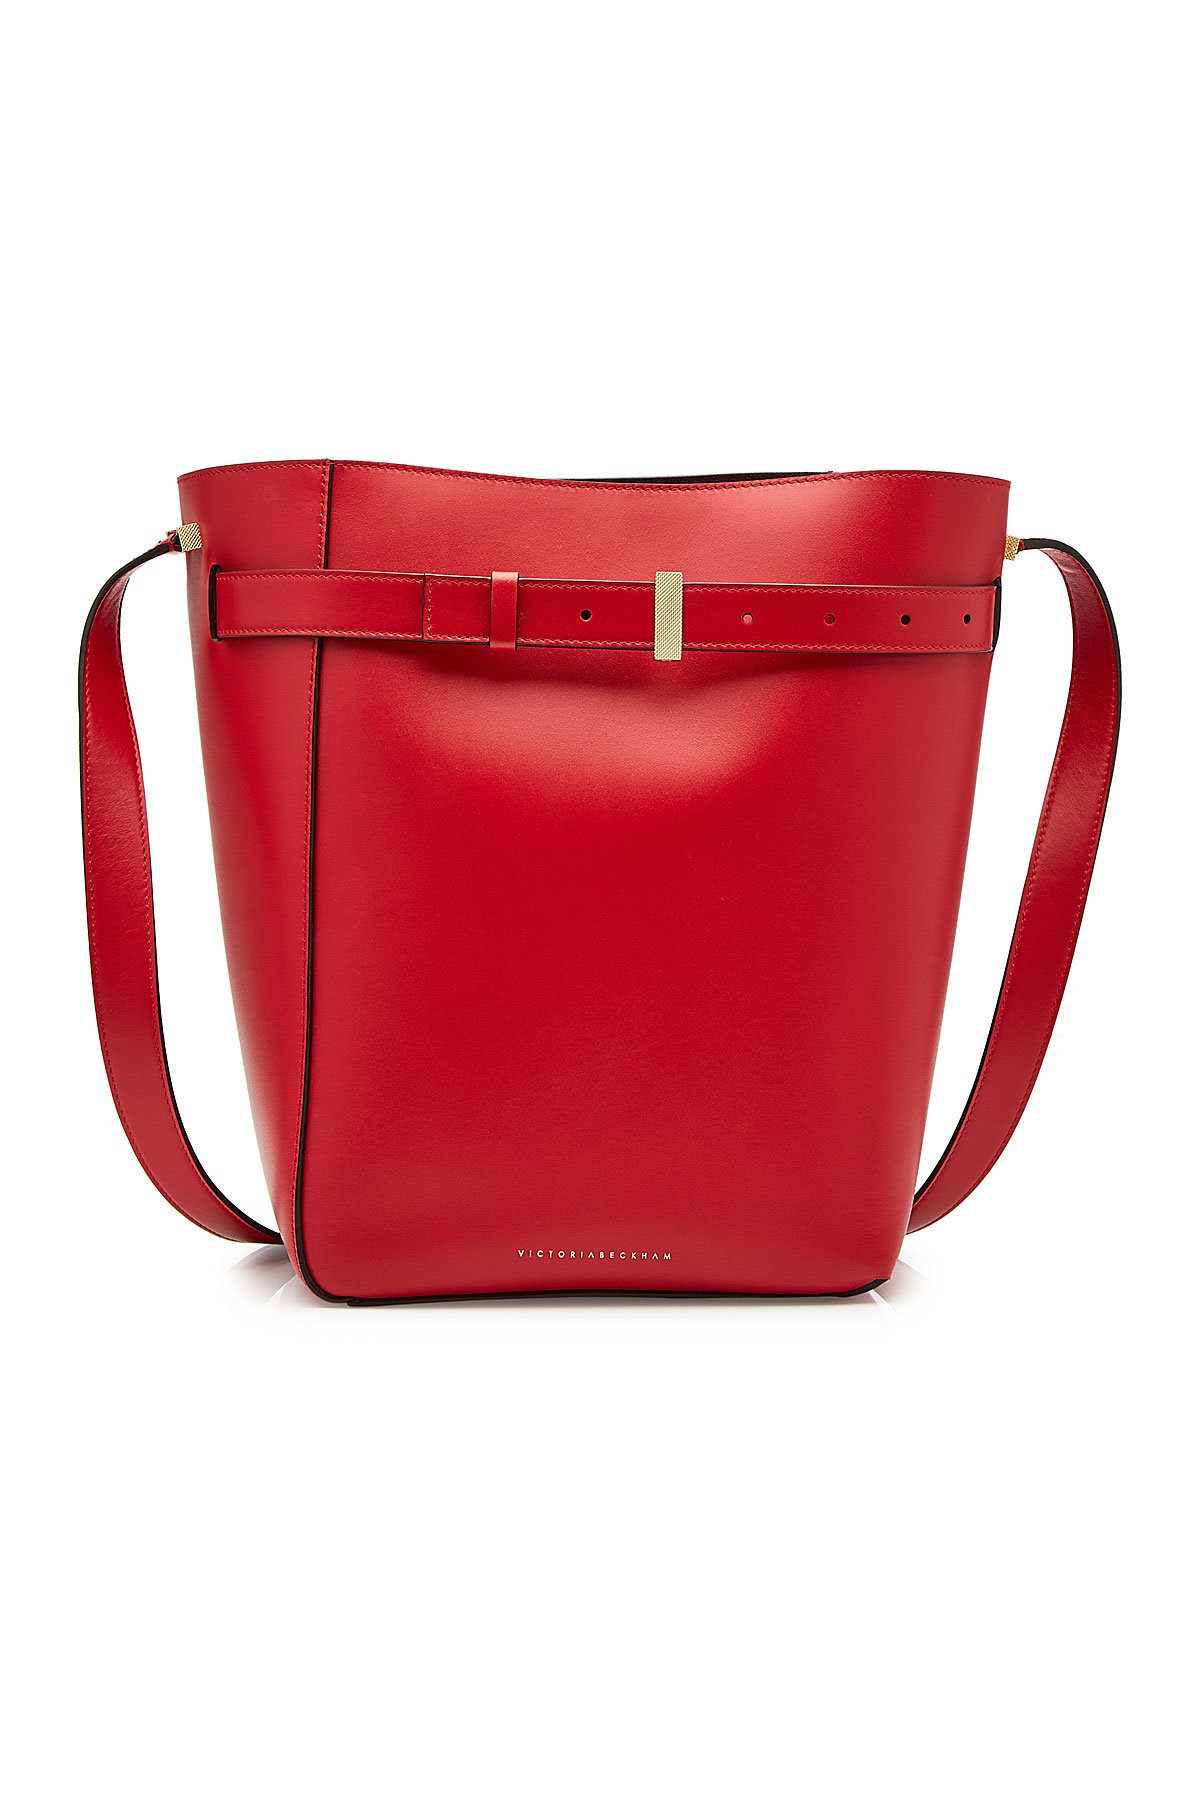 Victoria Beckham - Twin Bucket Leather Tote